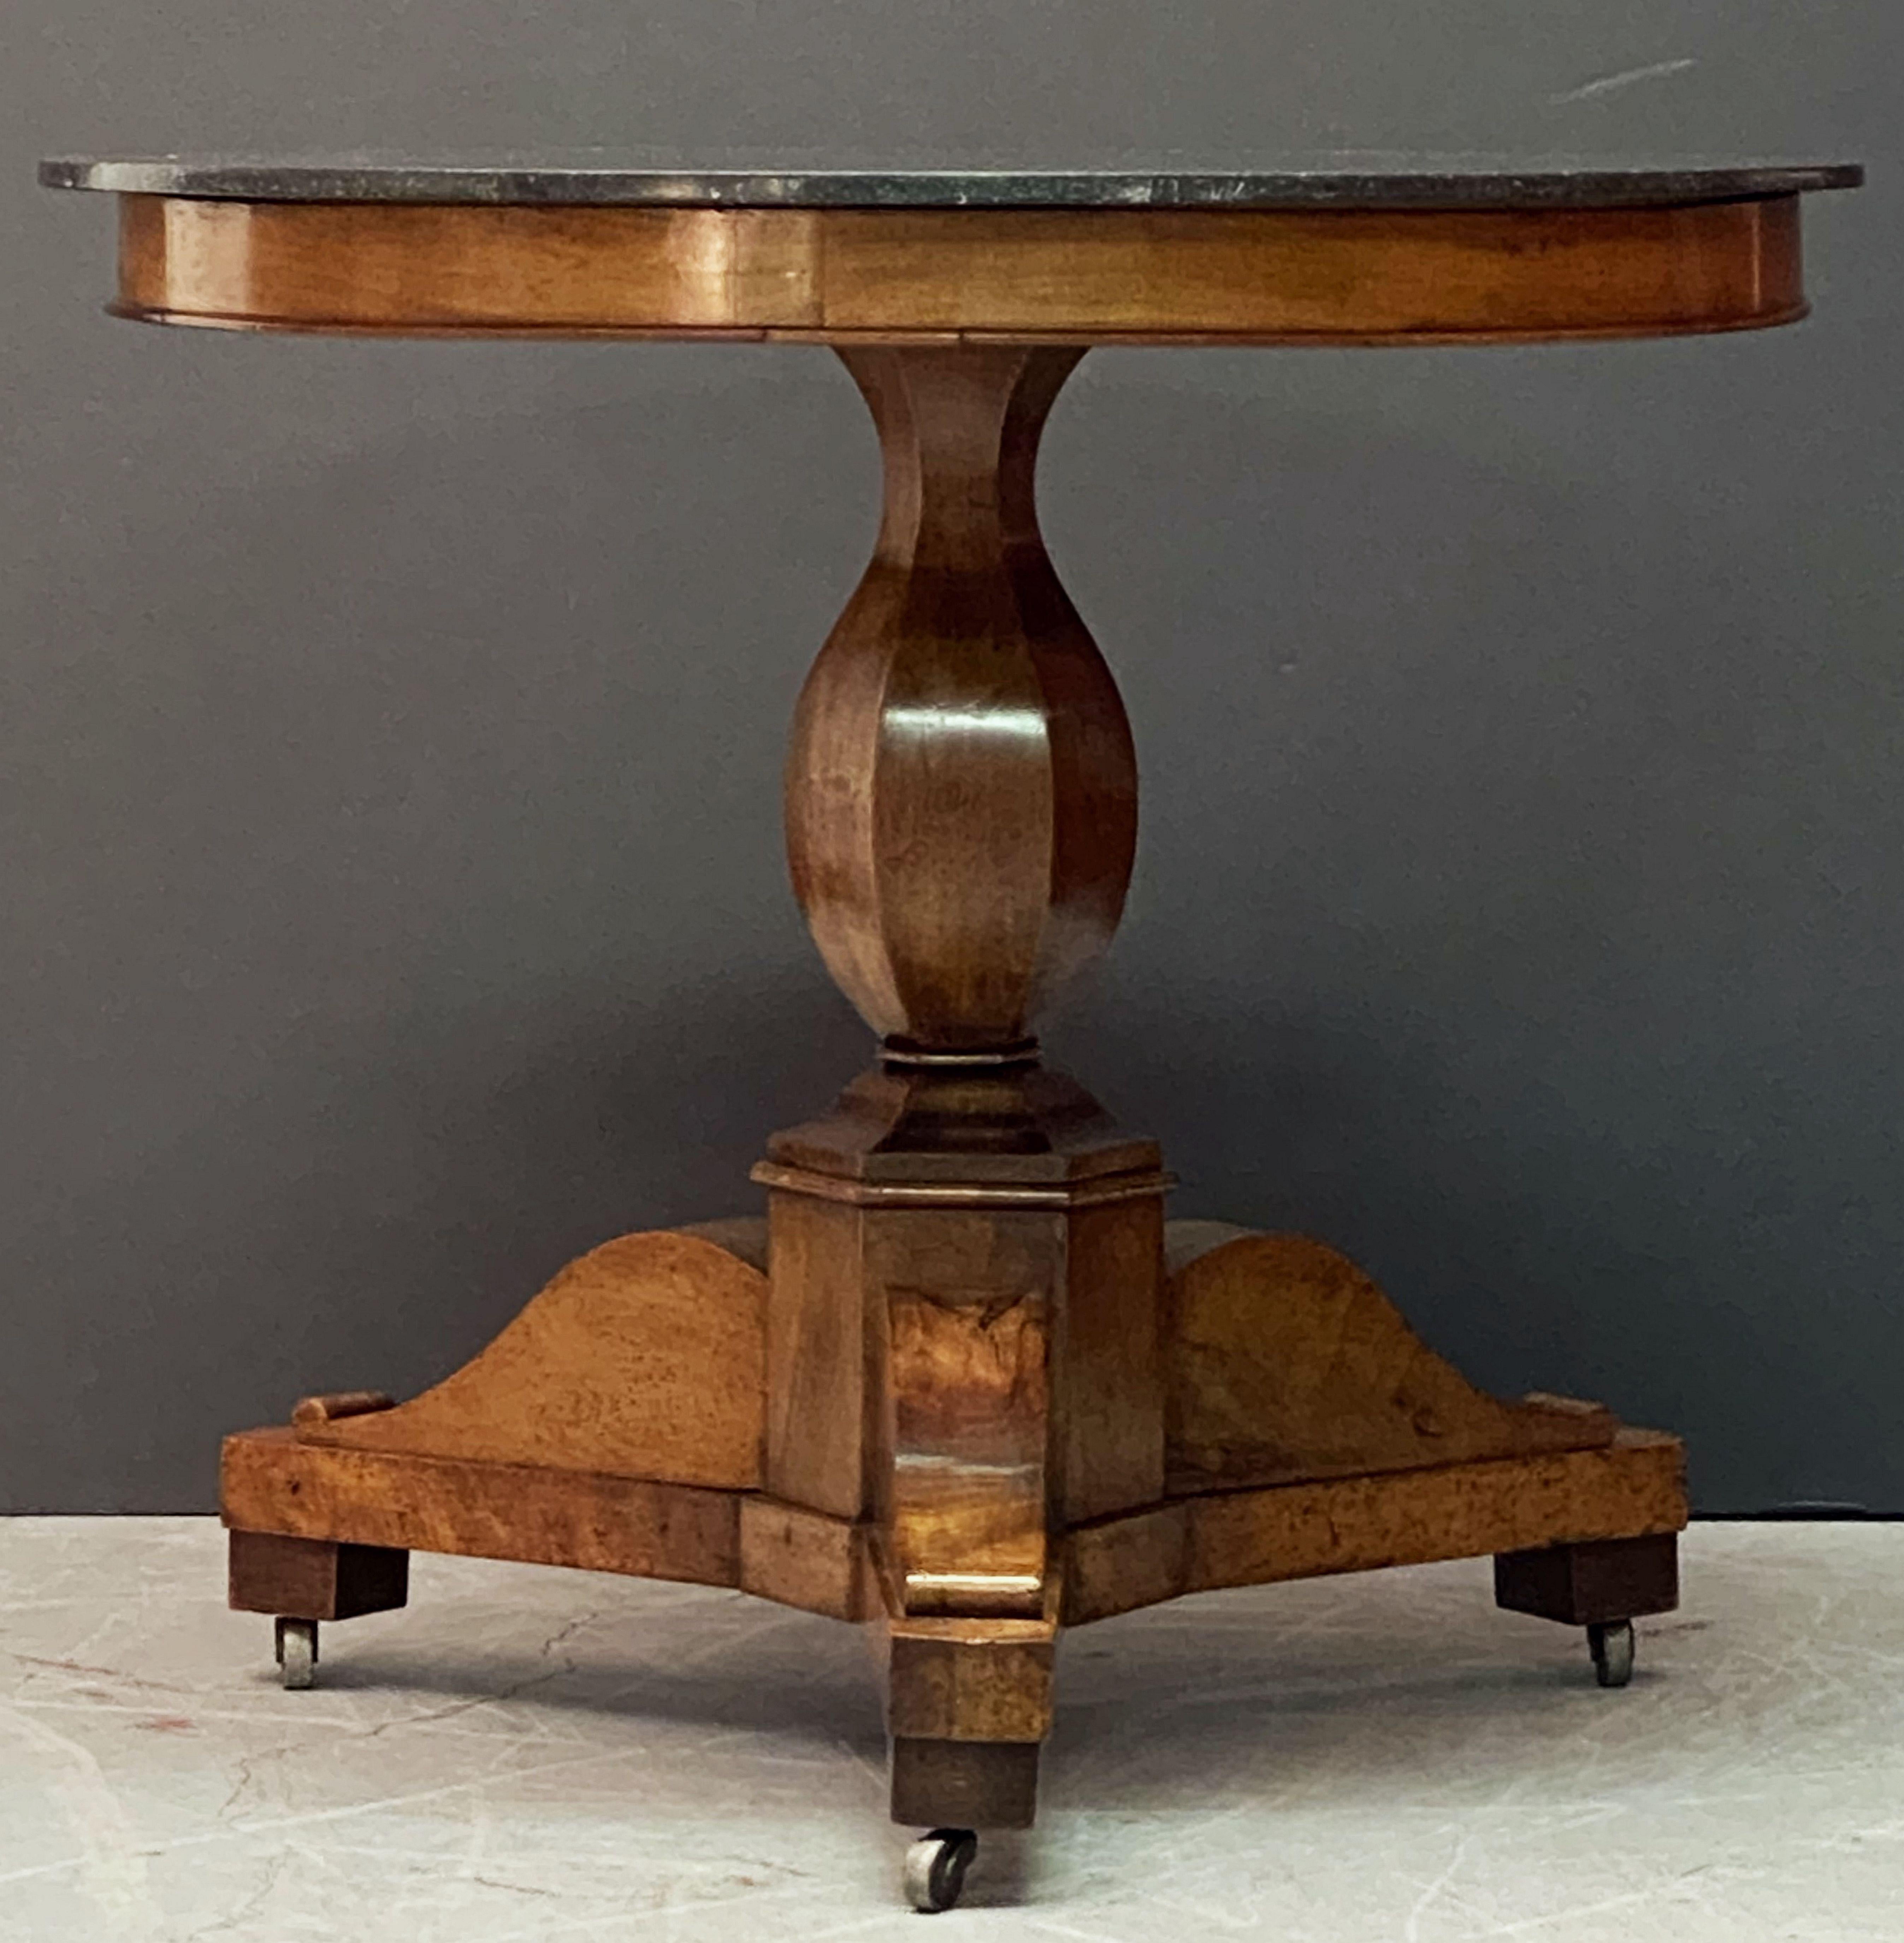 A fine French Guéridon or round center table from the 19th century, a beautifully figured central walnut column supports the circular marble top which is original to the table. Set upon a patinated tri-form base that still retains the original